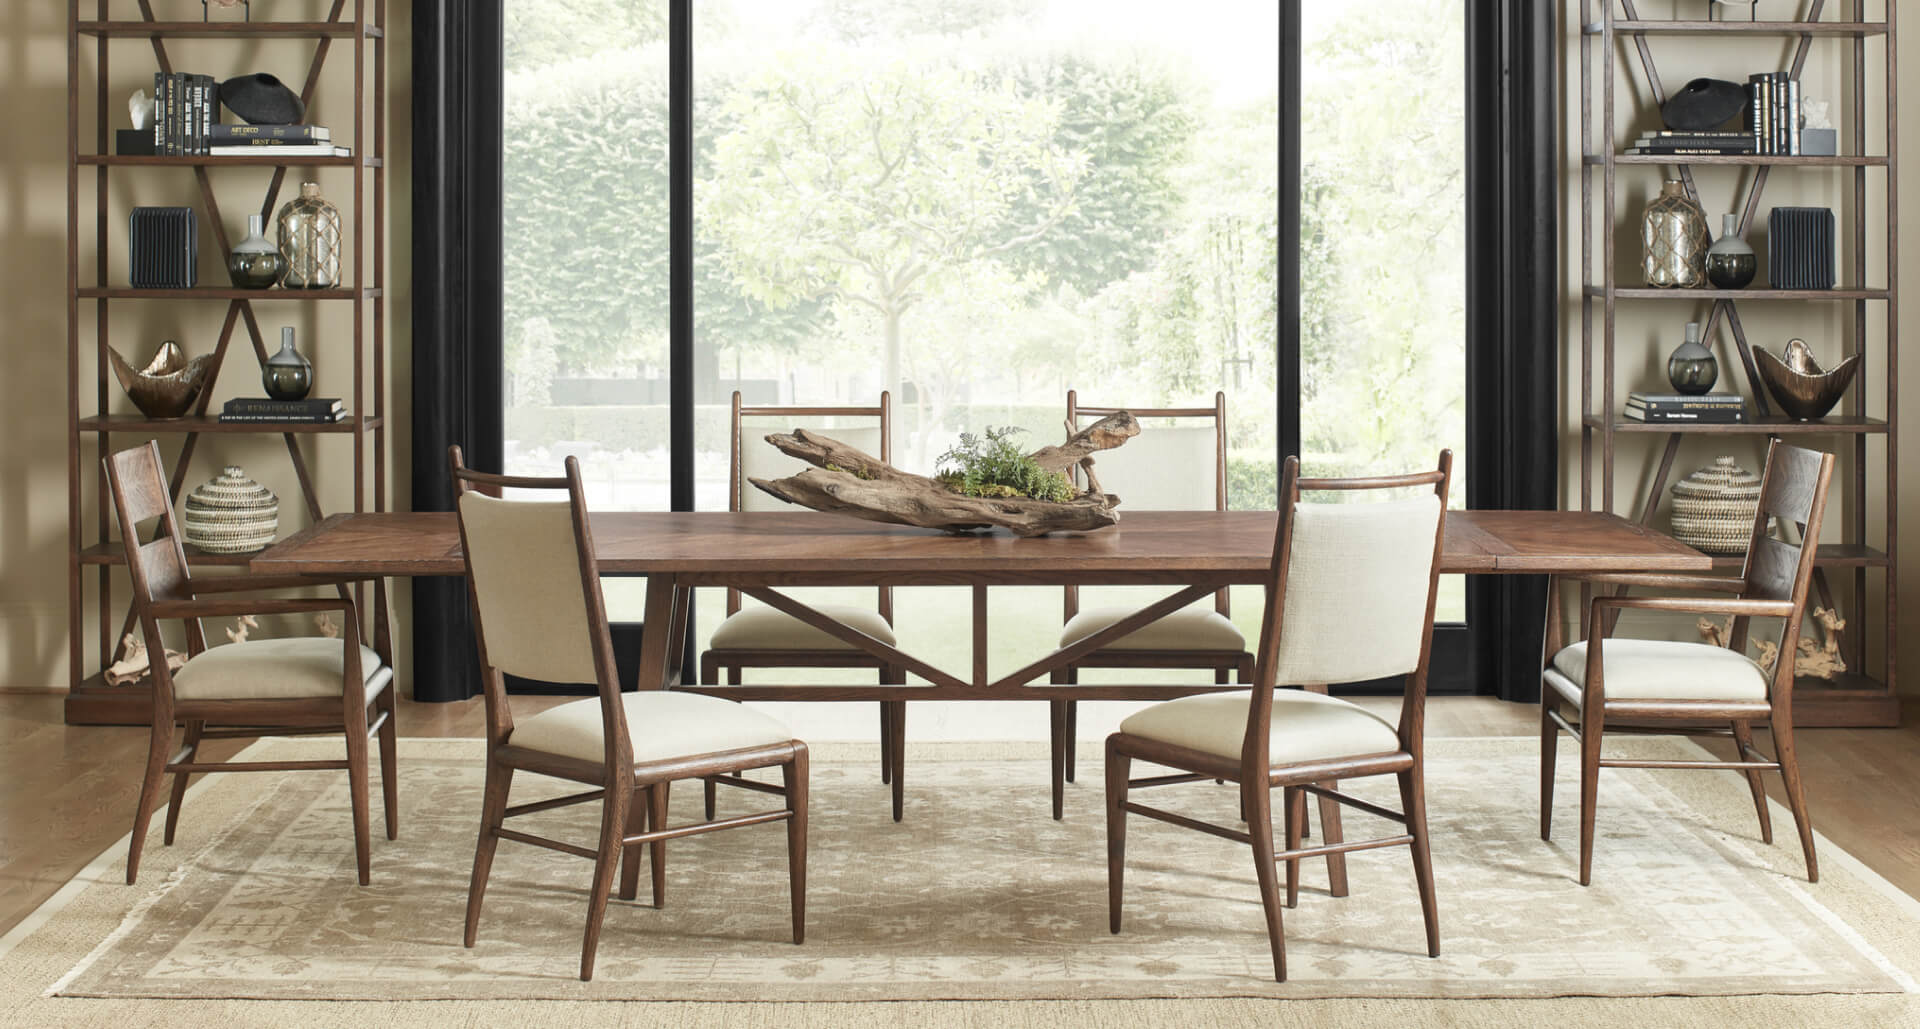 dining room setting with wooden table and four upholstered chairs over and area rug